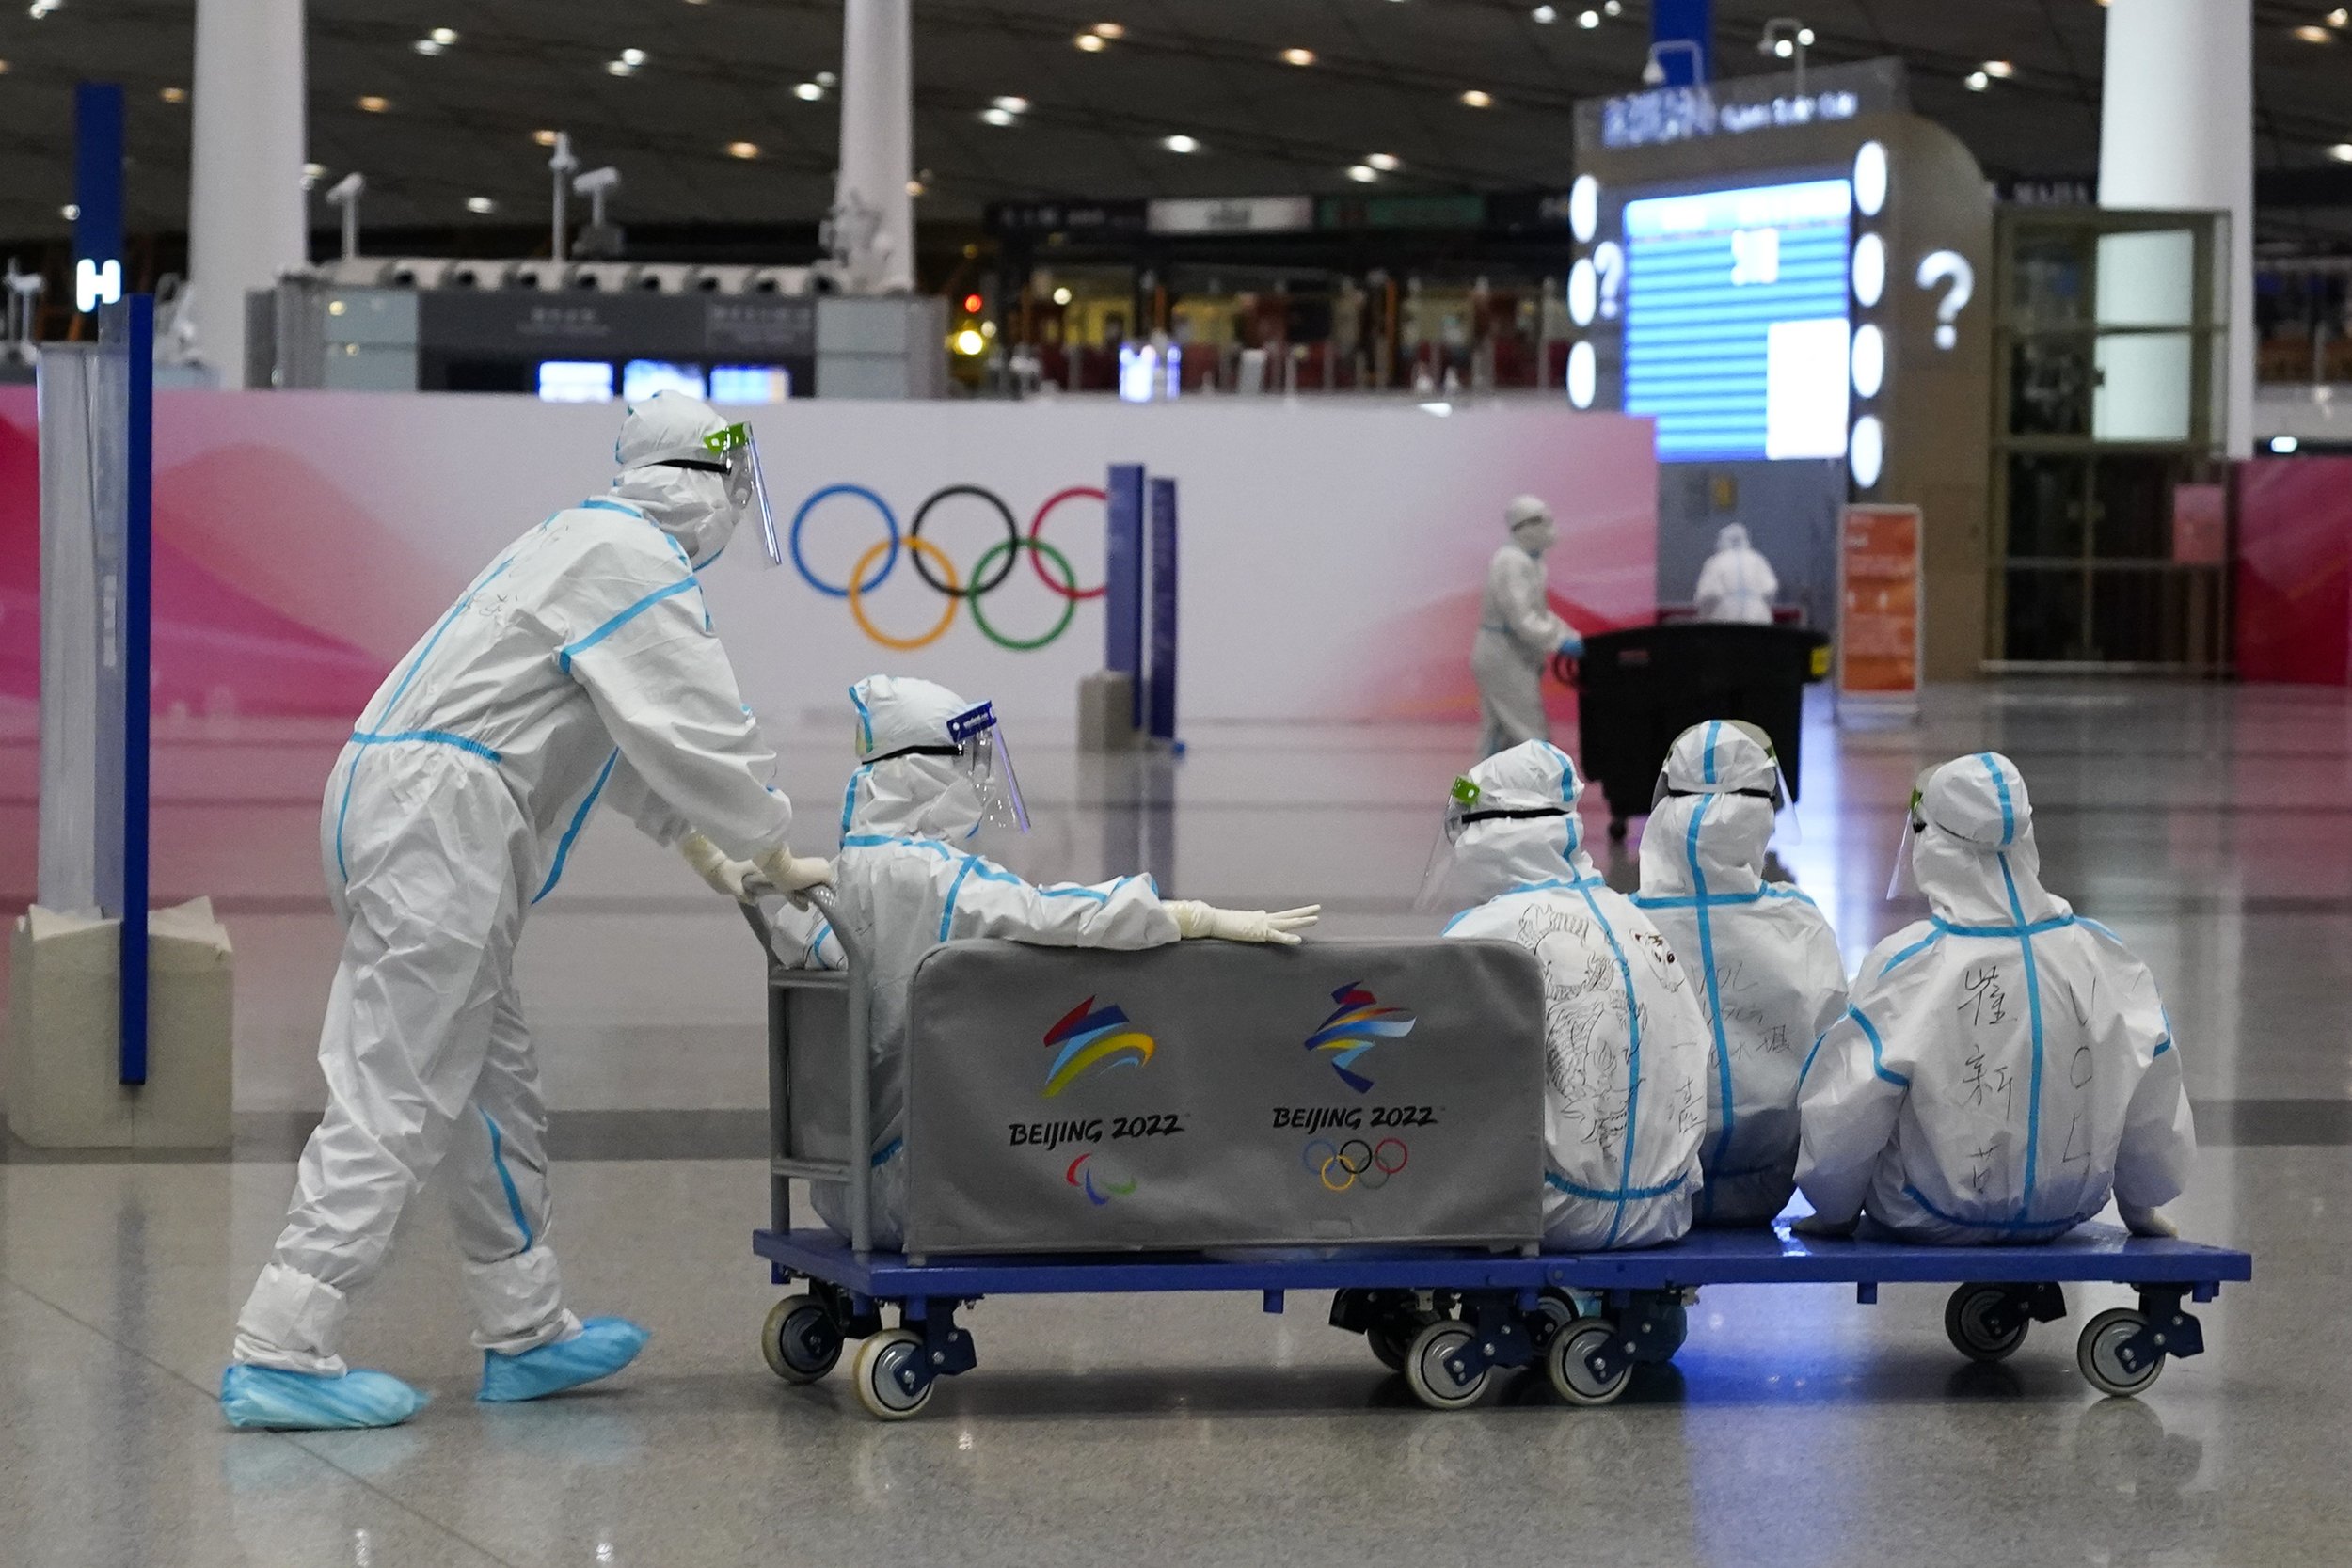  Volunteers ride on a cart at the Beijing Capital International Airport after the conclusion of the 2022 Winter Olympics, Sunday, Feb. 20, 2022, in Beijing. (AP Photo/Ashley Landis) 